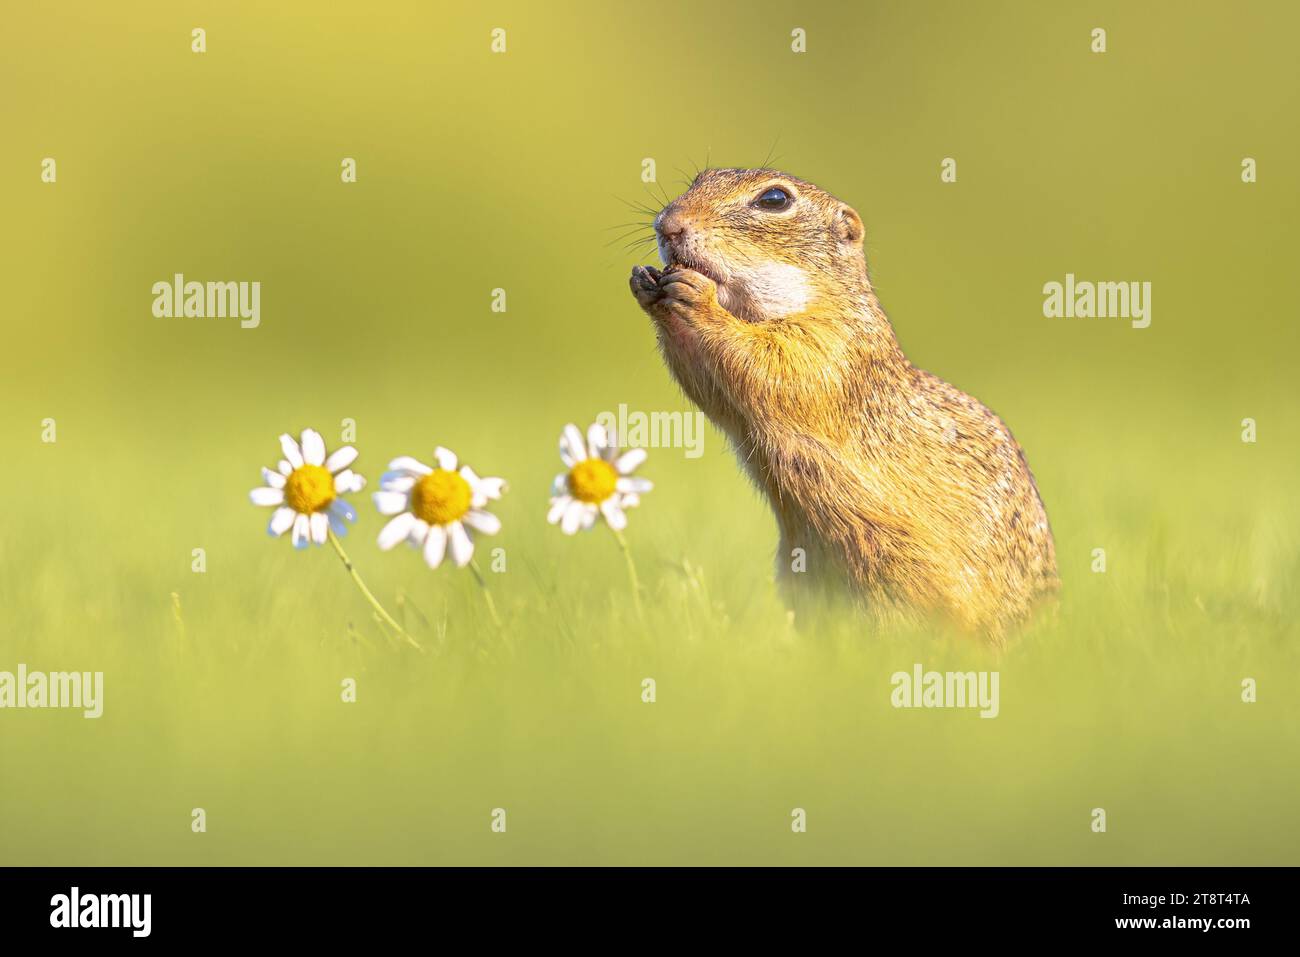 European Ground Squirrel (Spermophilus citellus) or Souslik. Rodent looking at camera in upright position. Wildlife Scene of Nature in Europe. Stock Photo